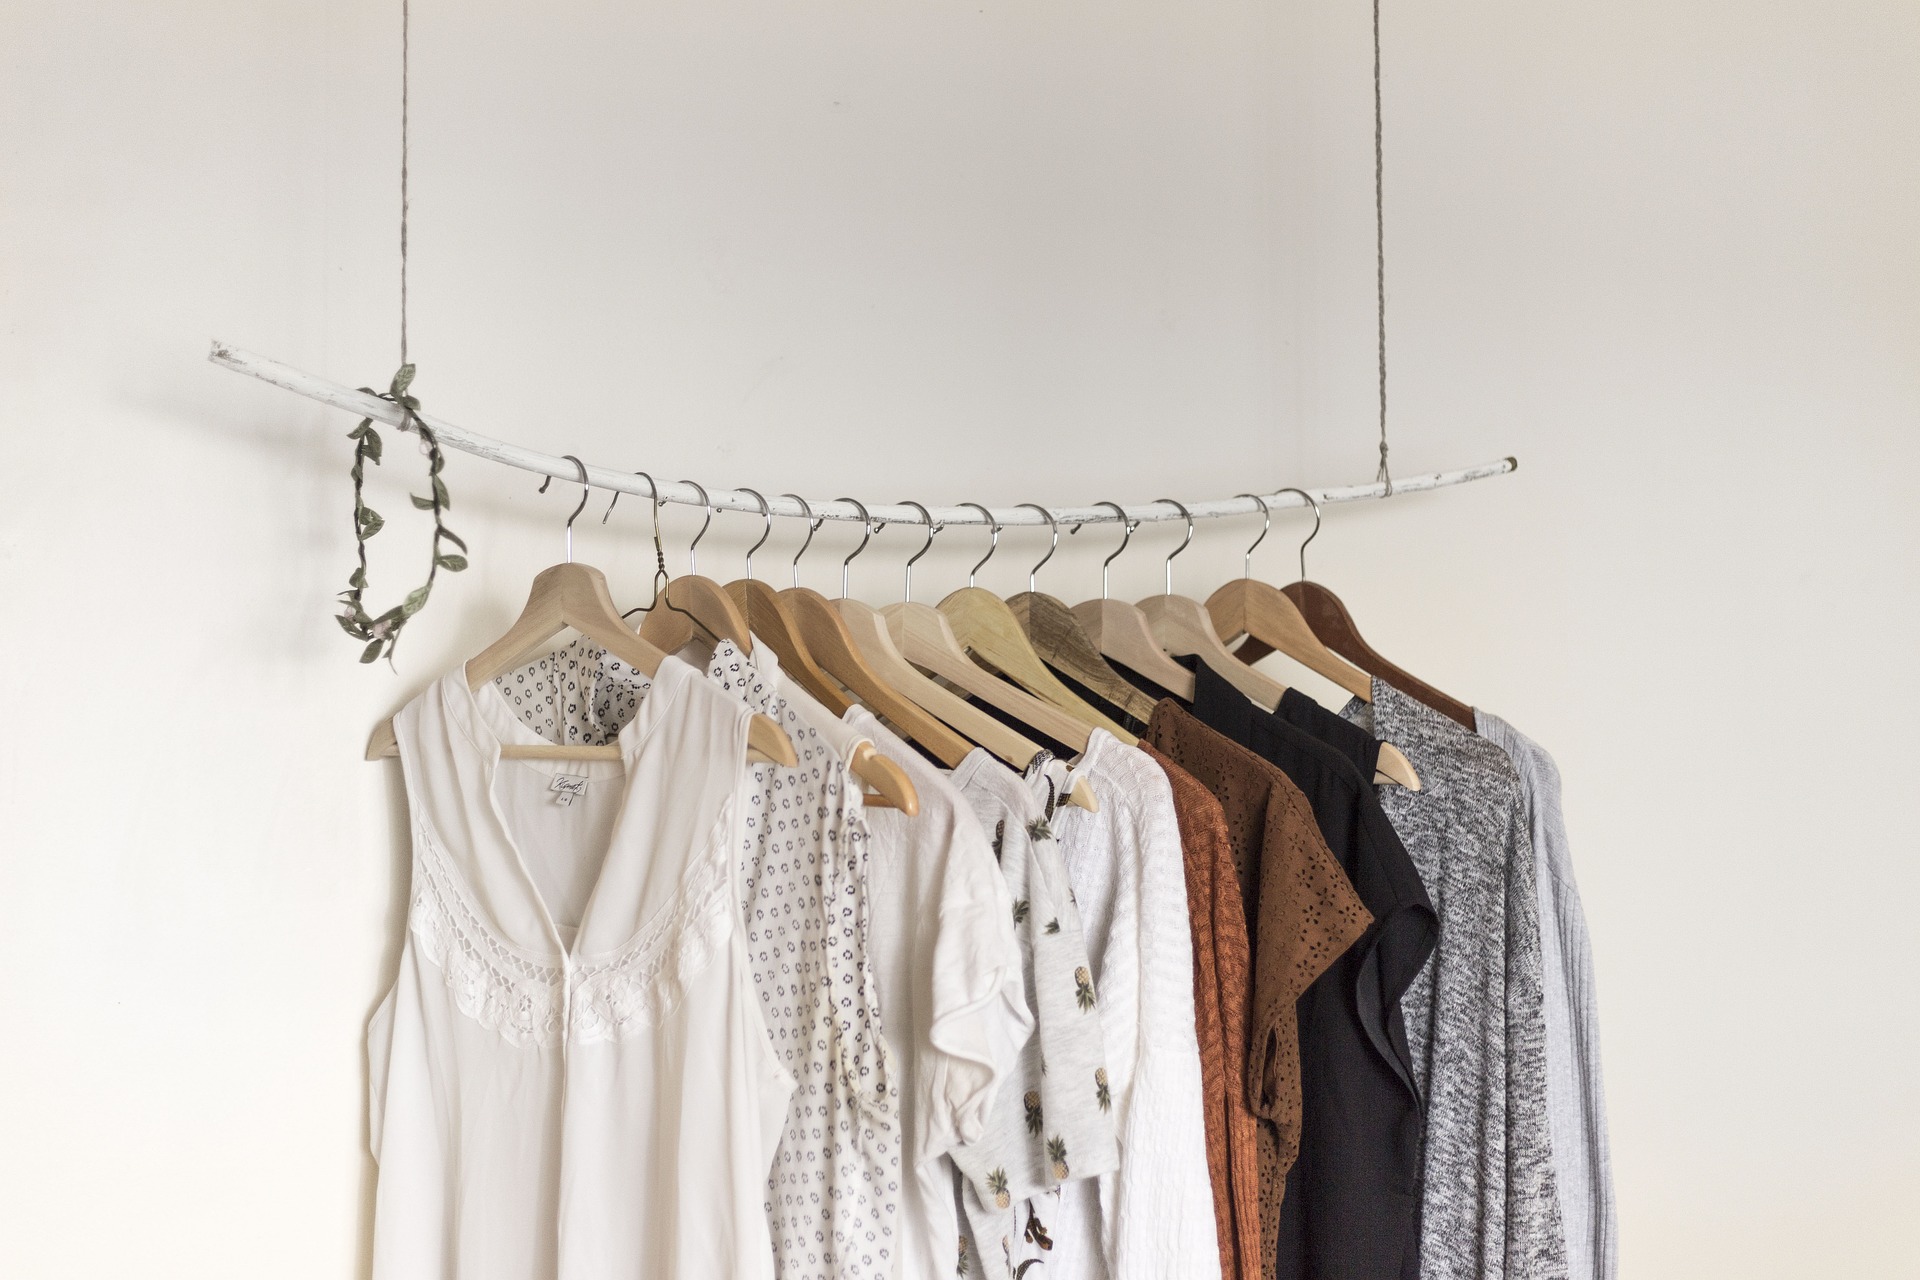 A white bar is suspended on wire against an off-white wall. On the bar hand ladies' blouses in shades of white, brown and black. Some have small prints. A small, green wreath hangs on the left end of the bar.